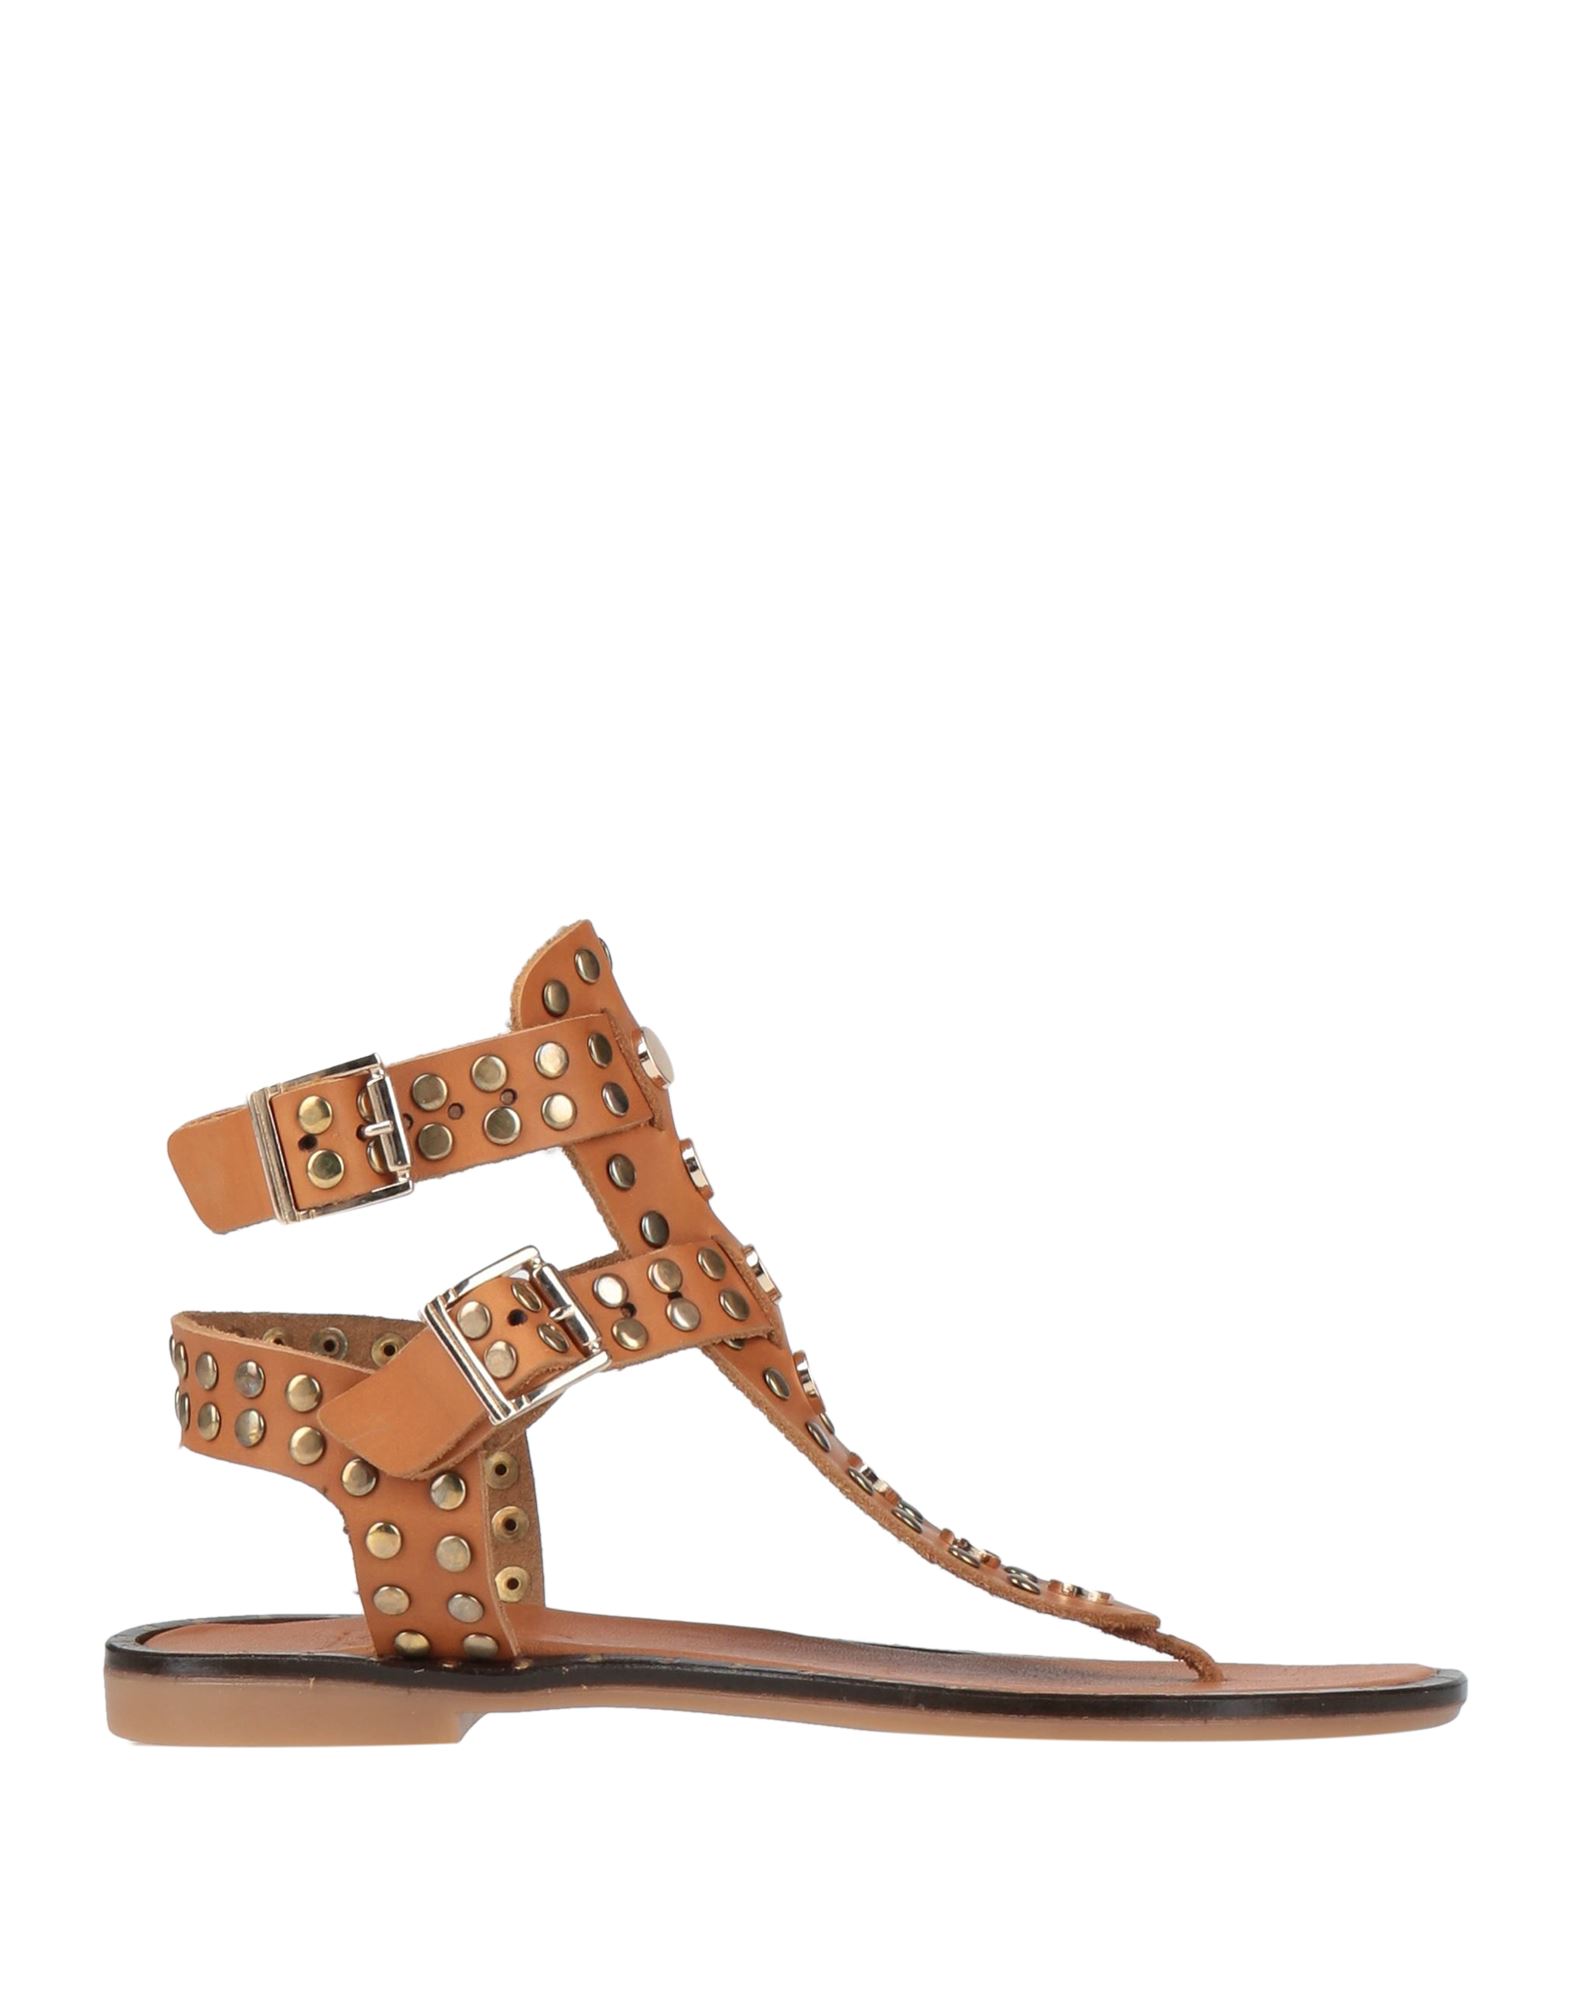 Islo Isabella Lorusso Toe Strap Sandals In Brown